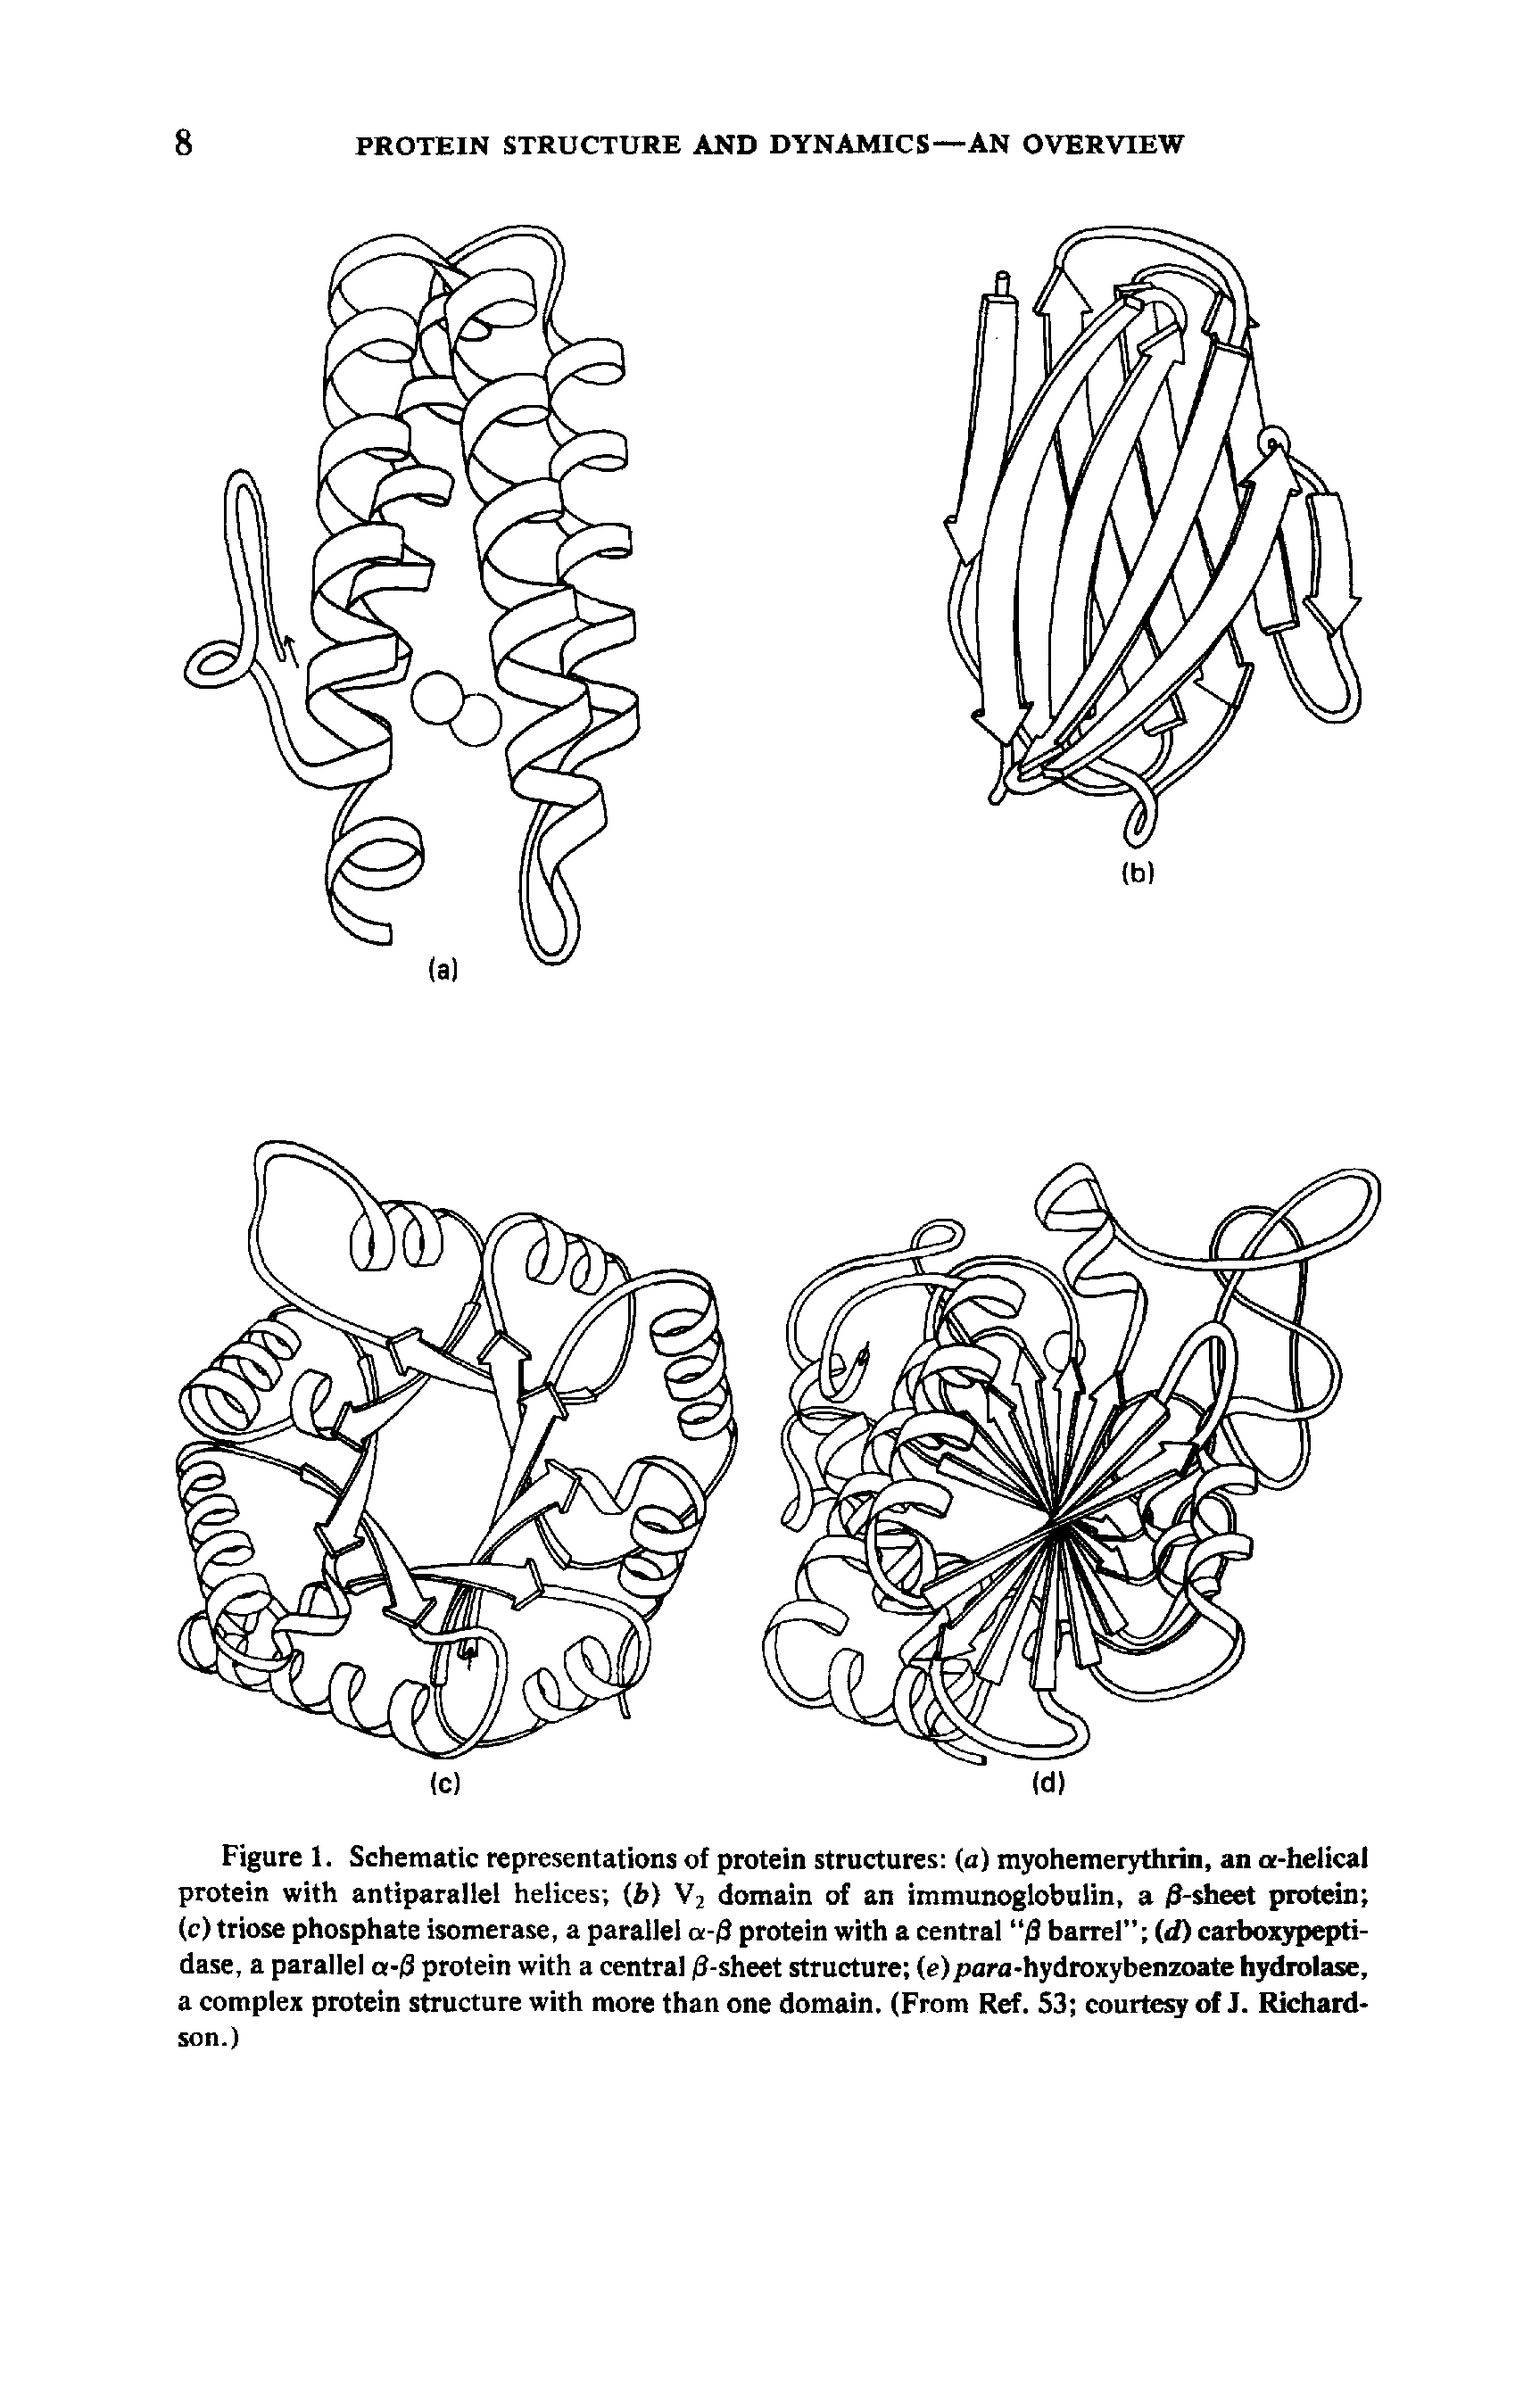 Figure 1. Schematic representations of protein structures (a) myohemerythrin, an a-helical protein with antiparallel helices ( >) V2 domain of an immunoglobulin, a (3-sheet protein (c) triose phosphate isomerase, a parallel a-ff protein with a central (3 barrel (d) carboxypepti-dase, a parallel a- 3 protein with a central ( -sheet structure (e)para-hydroxybenzoate hydrolase, a complex protein structure with more than one domain. (From Ref. S3 courtesy of J. Richardson.)...